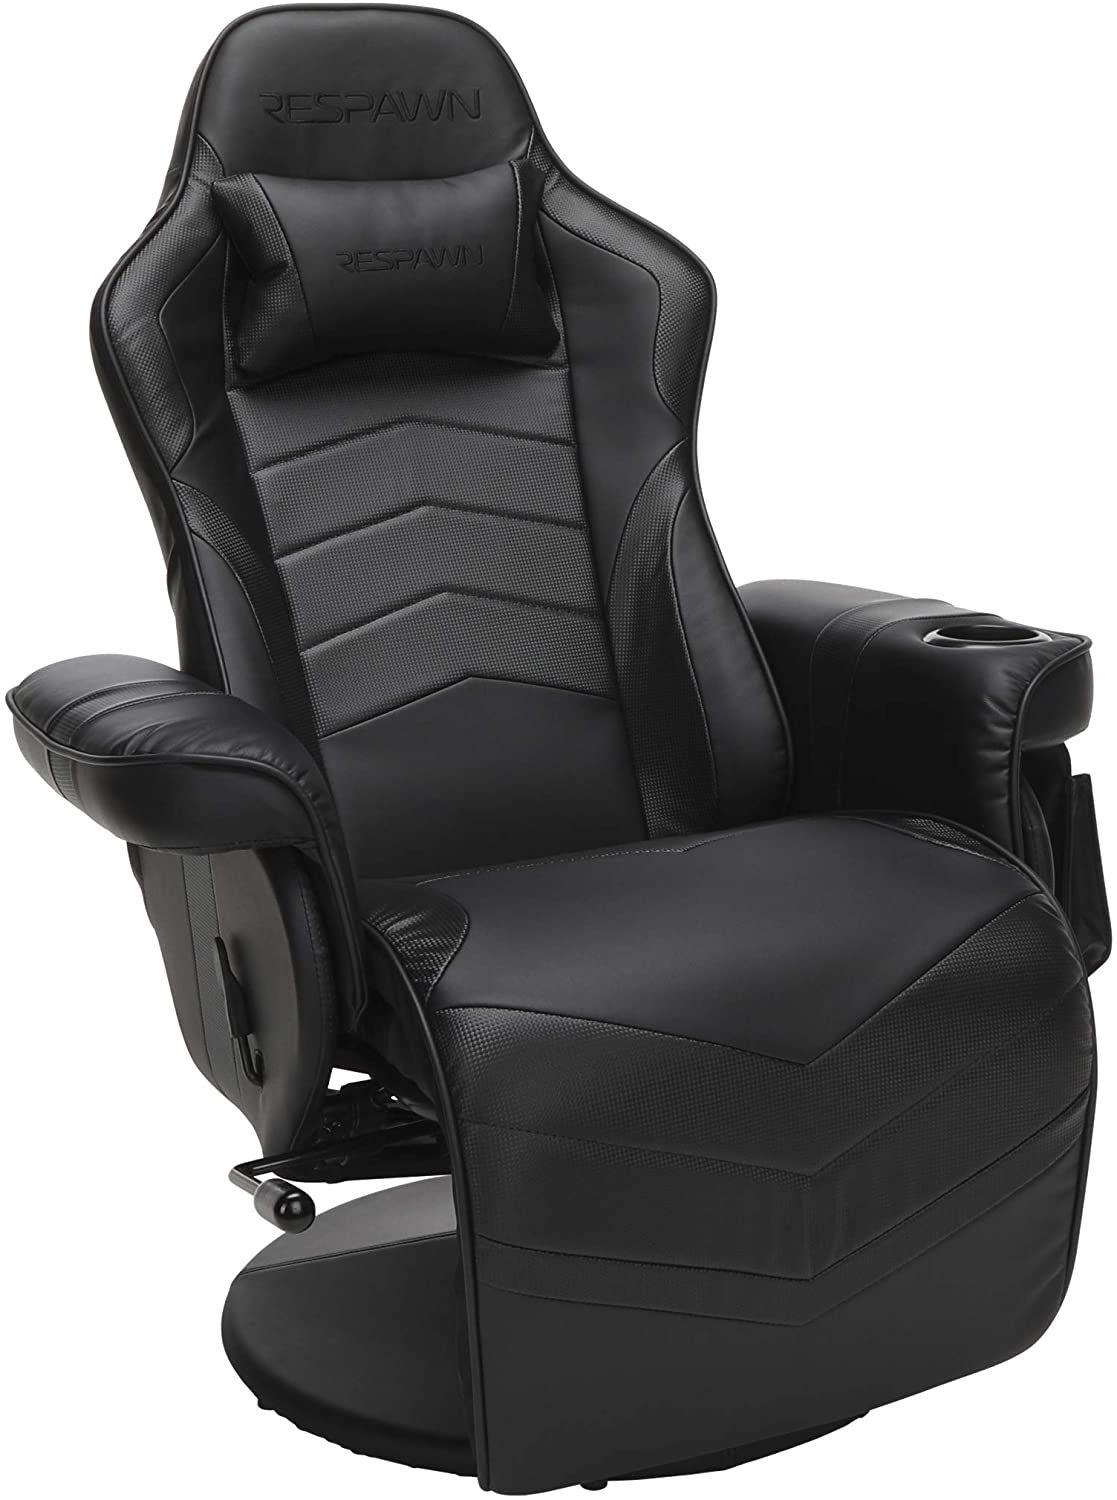 Best Gaming Chairs of 2020 Buyers Guide - CBR